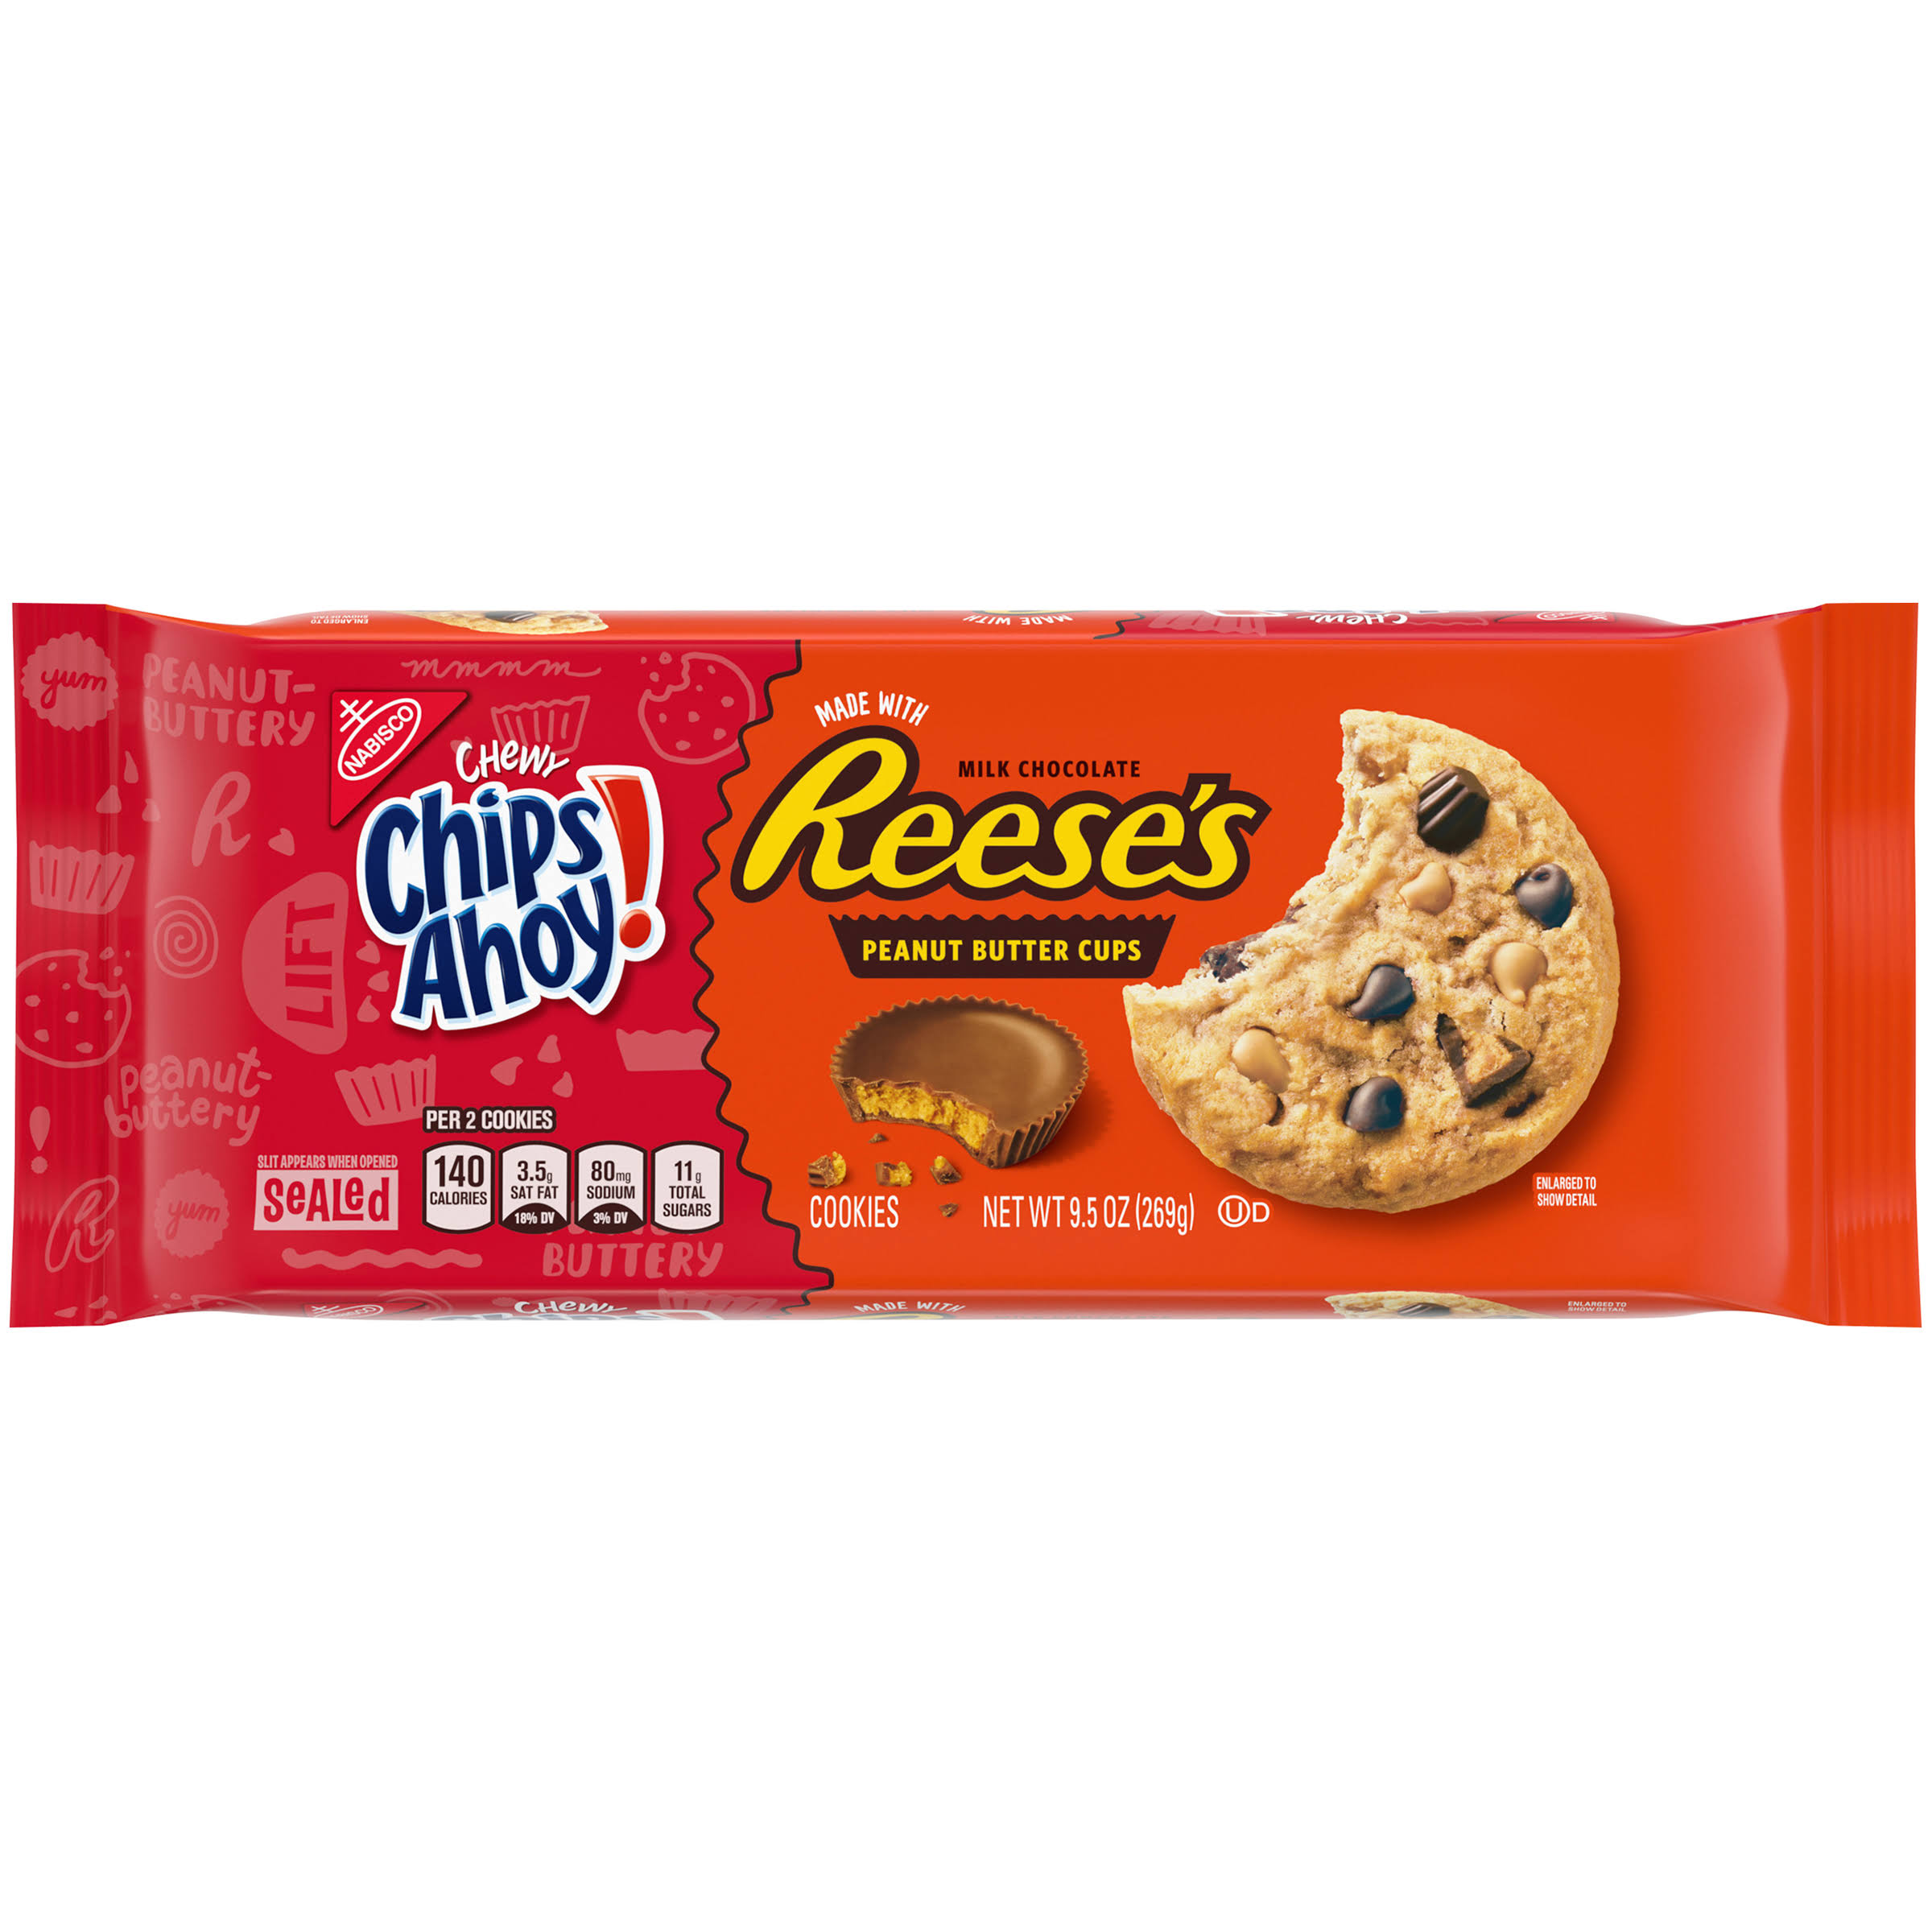 Chips Ahoy! Chewy Cookies Reese's Peanut Butter Cup - 9.5oz